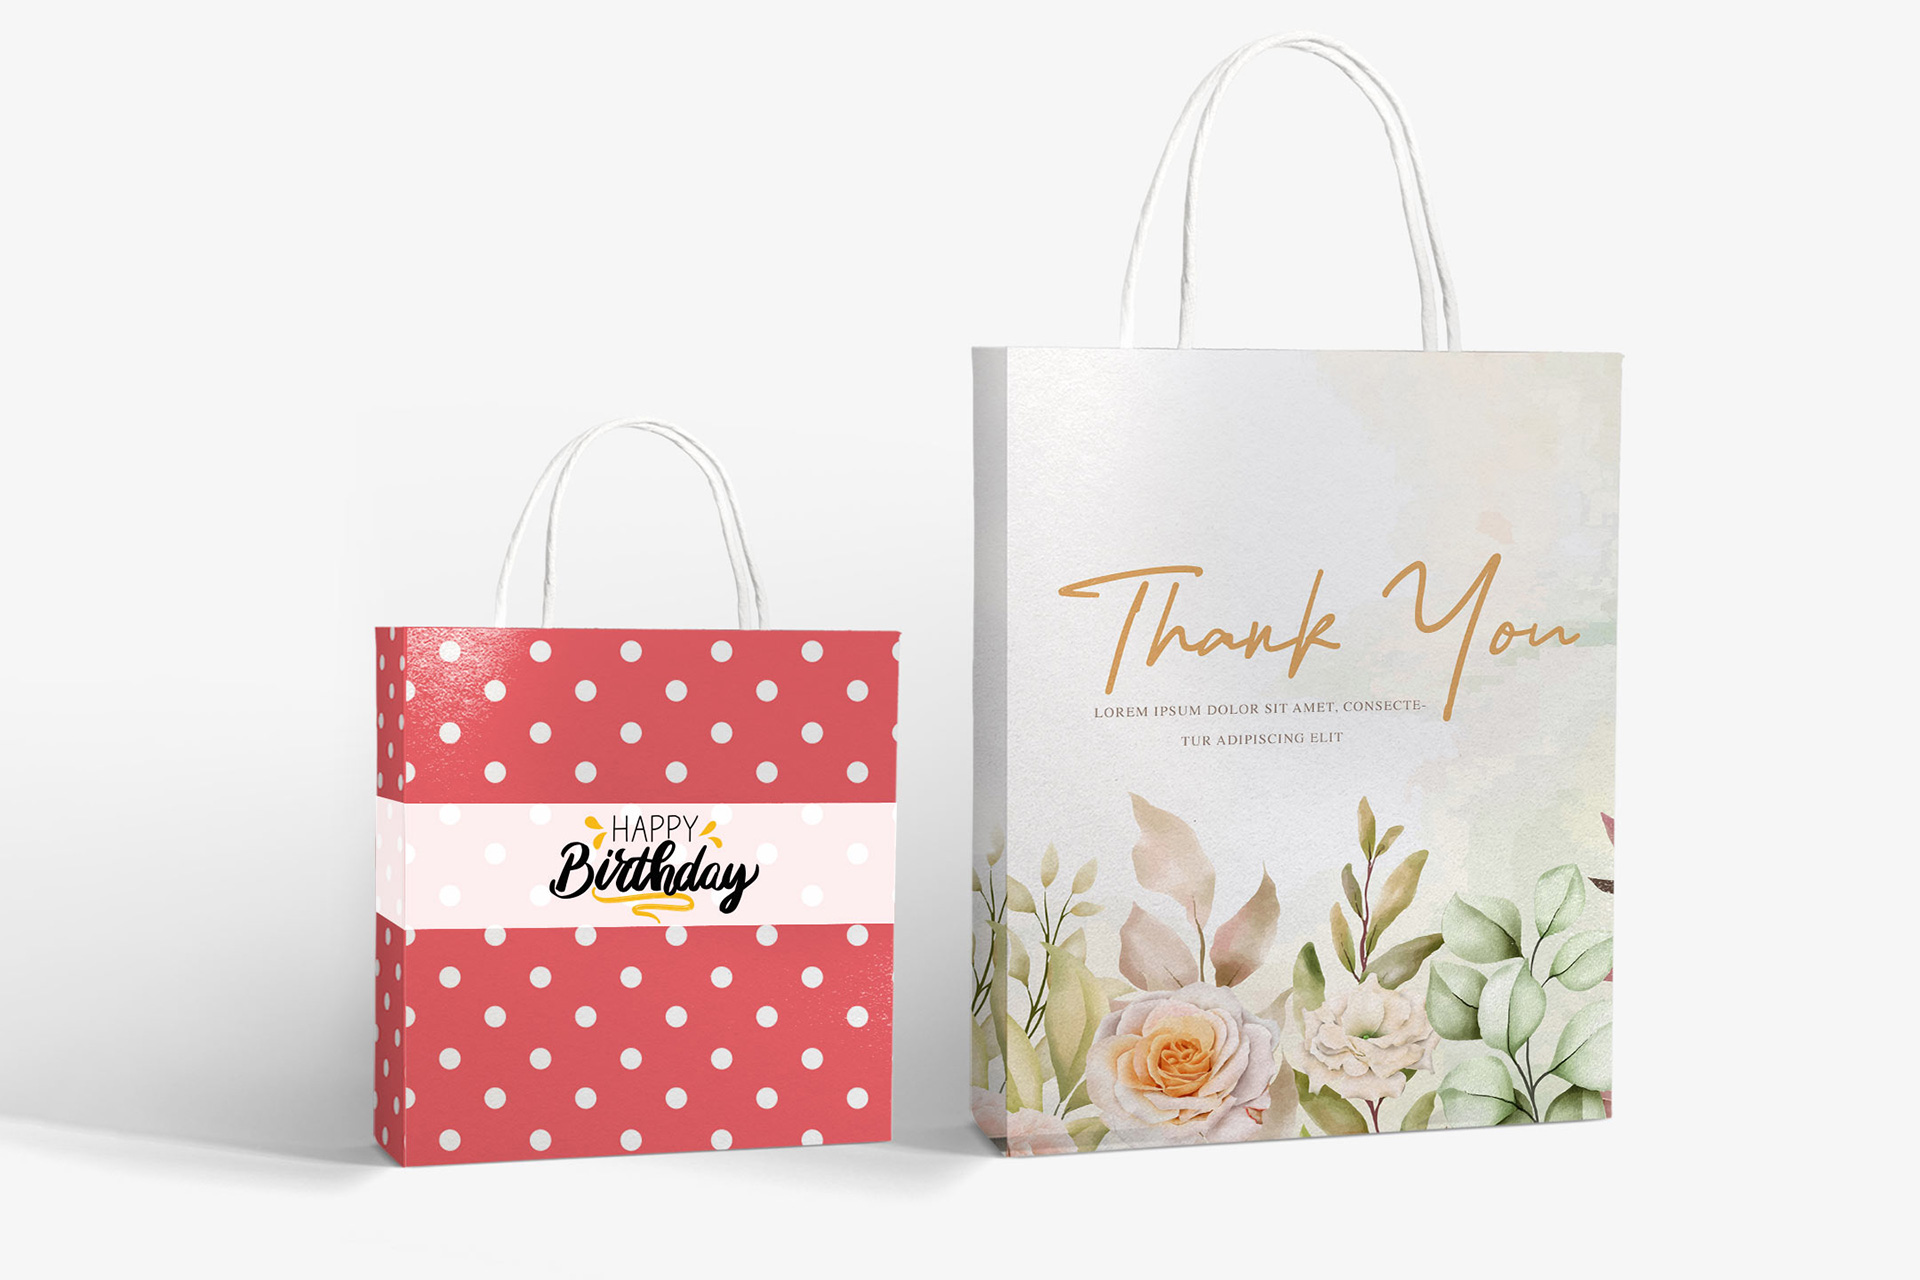 Transparent Gift Bags Handbag Wedding Tote Gift Bag For Birthday Wedding  Party For Guests Portable Packaging Bag Small Business - AliExpress